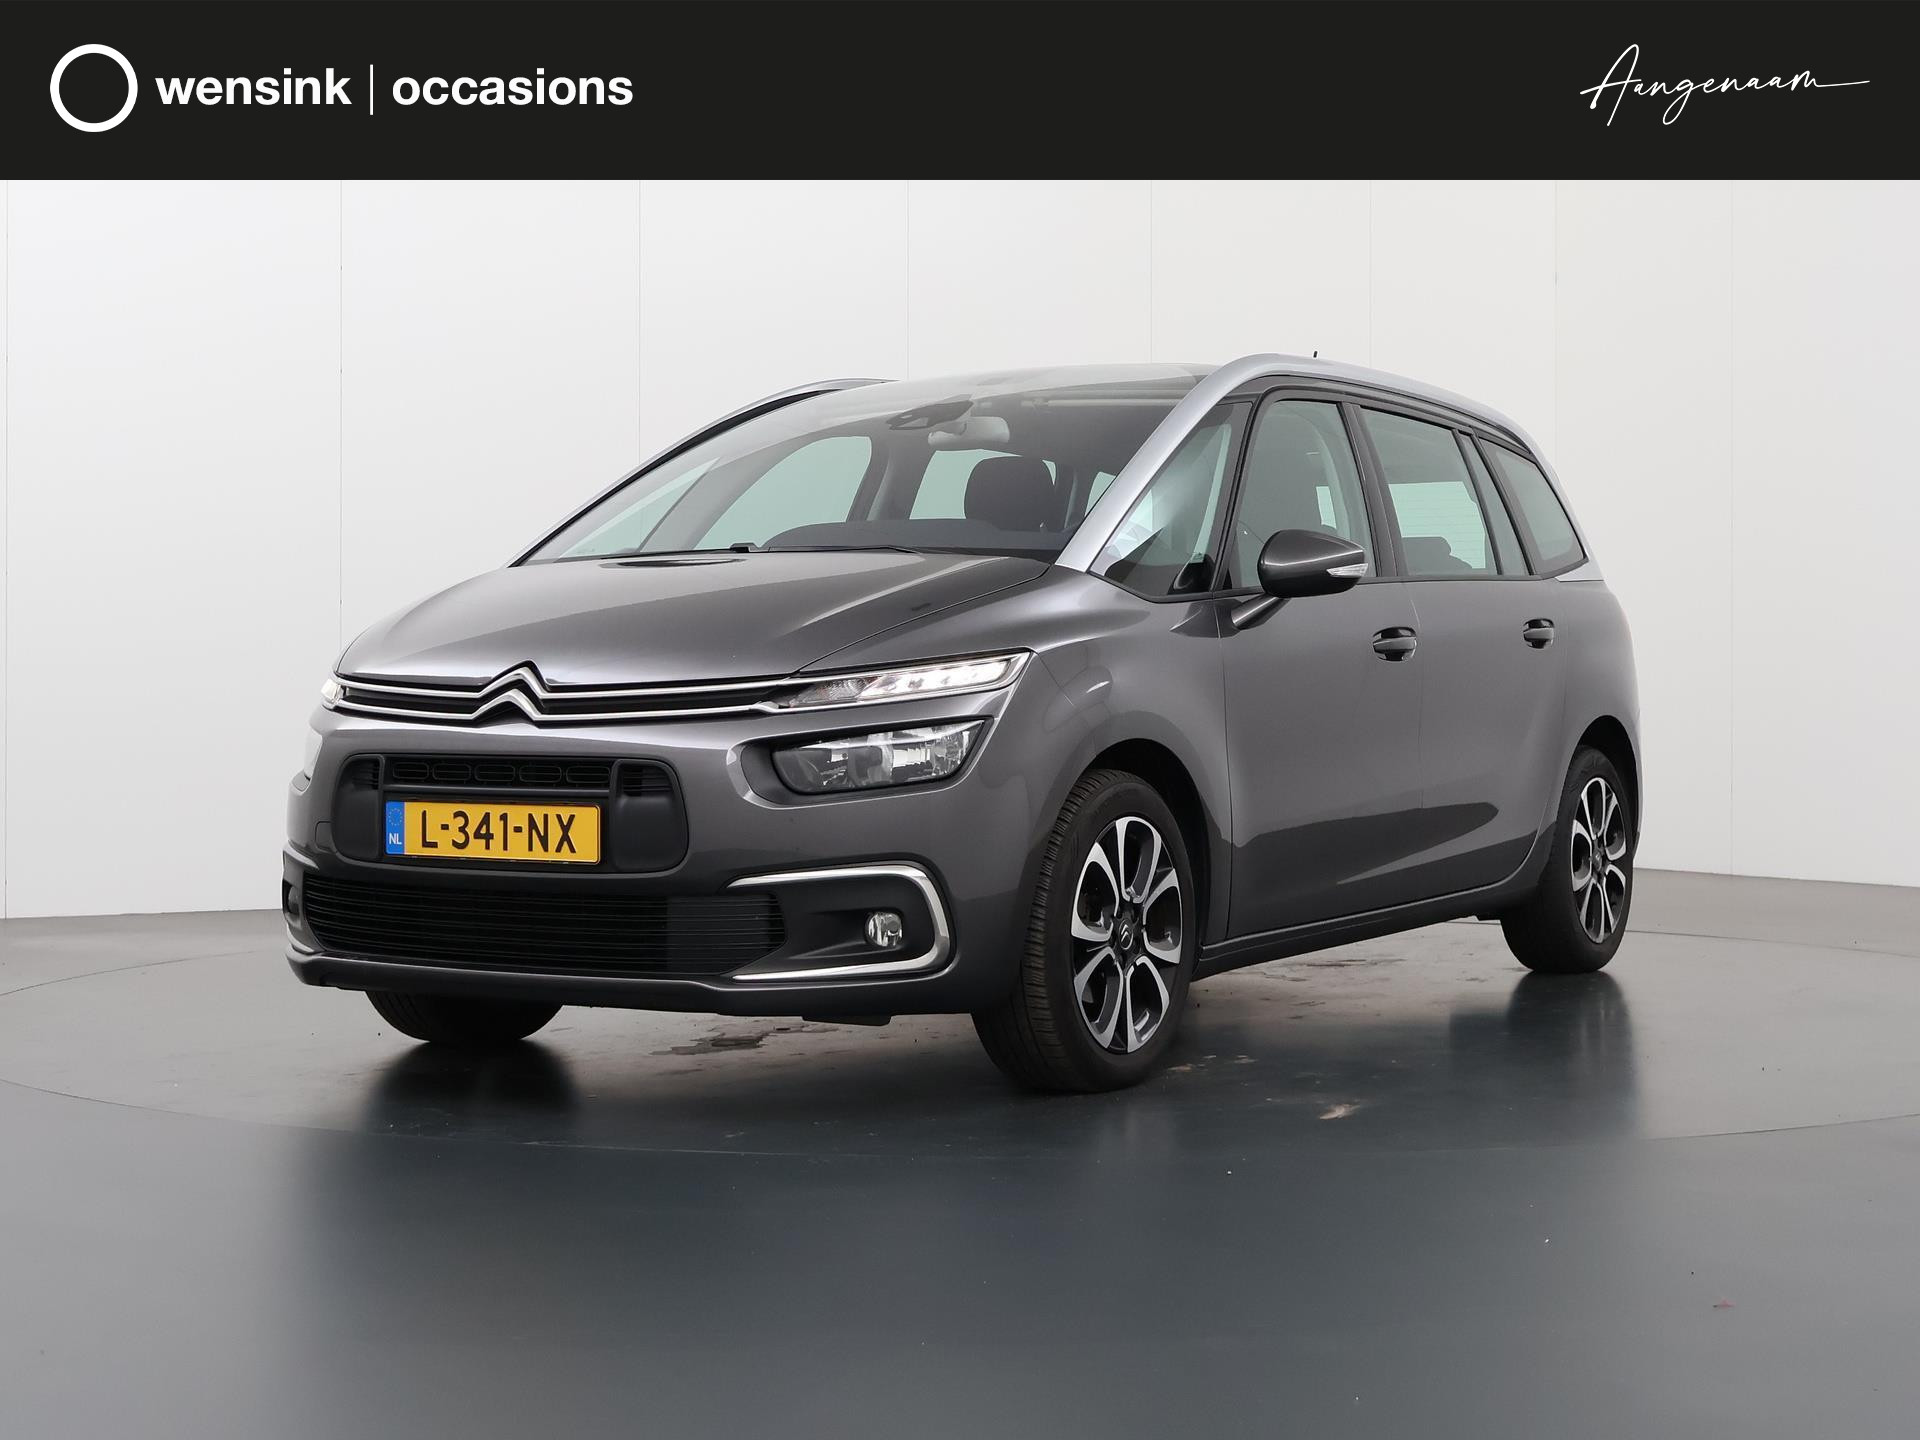 Citroen Grand C4 SpaceTourer 1.2 PureTech Business | 7 Persoons | Automaat | Navigatiesysteem | Achteruitrijcamera | Cruise Control | Climate Control | Apple Carplay/Android Auto |